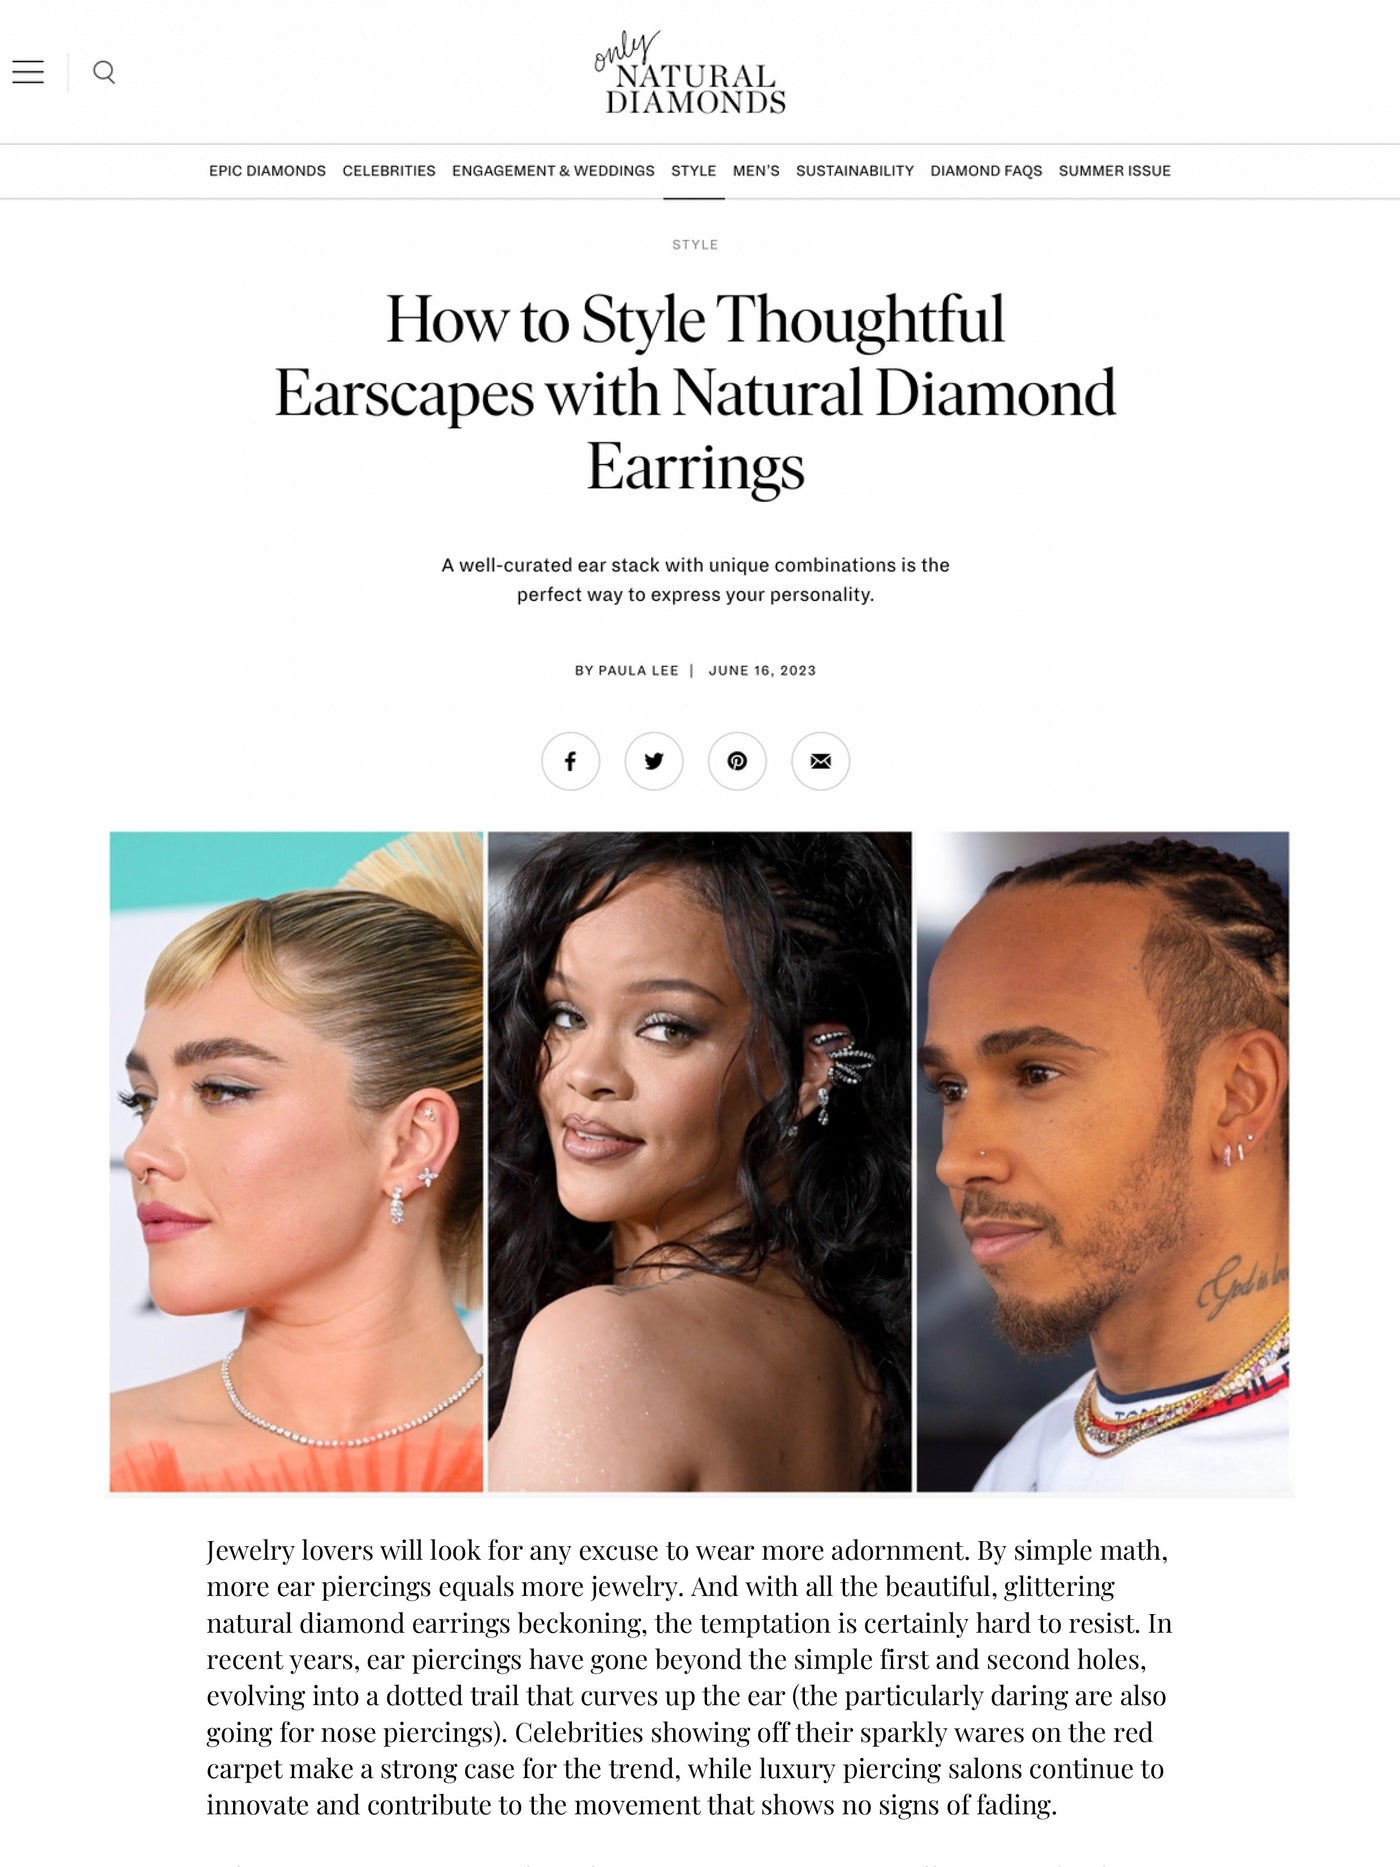 How to style thoughtful earscapes with natural diamond earrings